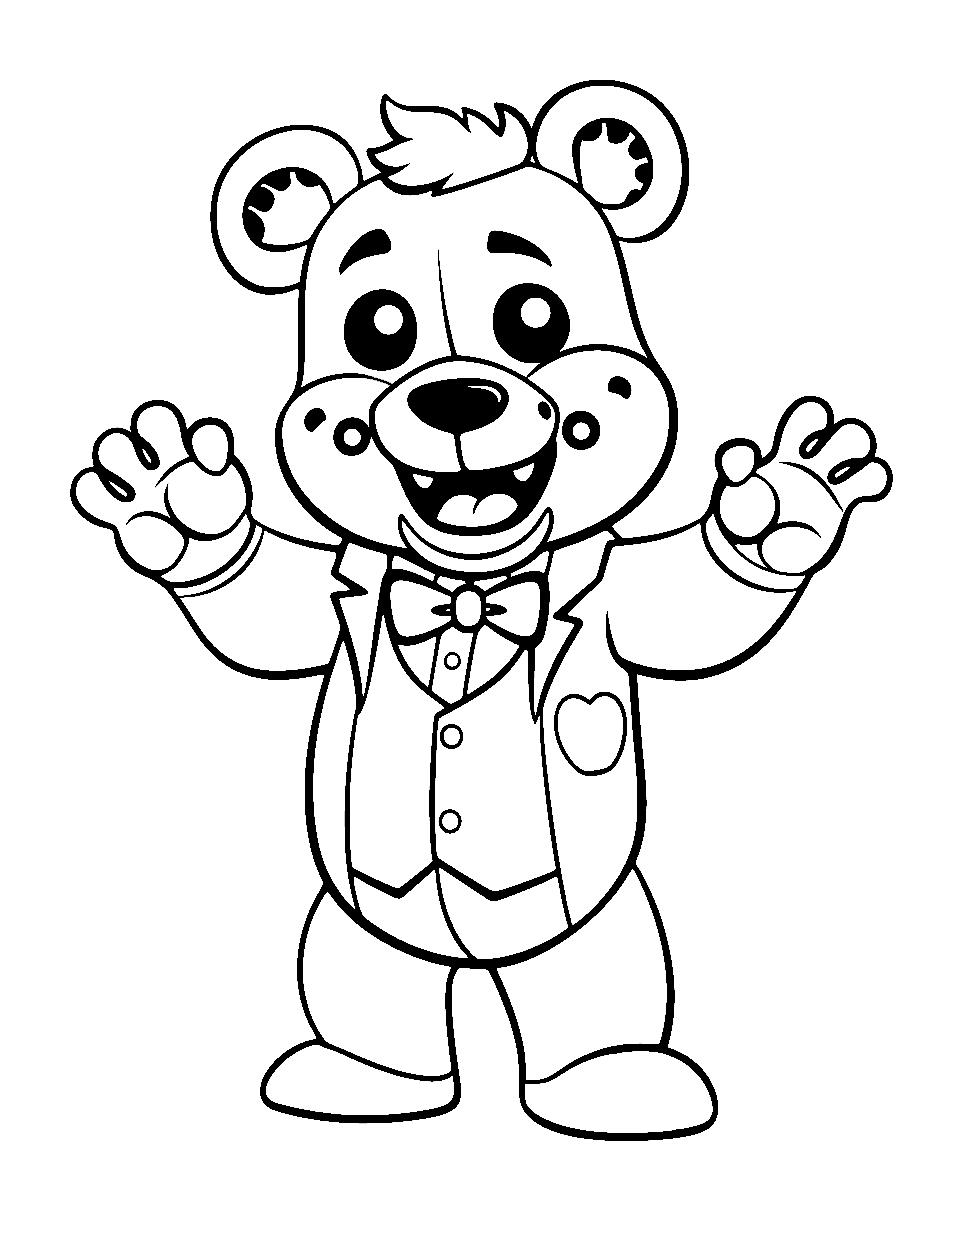 Fredbear’s Greeting Coloring Page - Fredbear waving a friendly hello in a welcoming disguise.